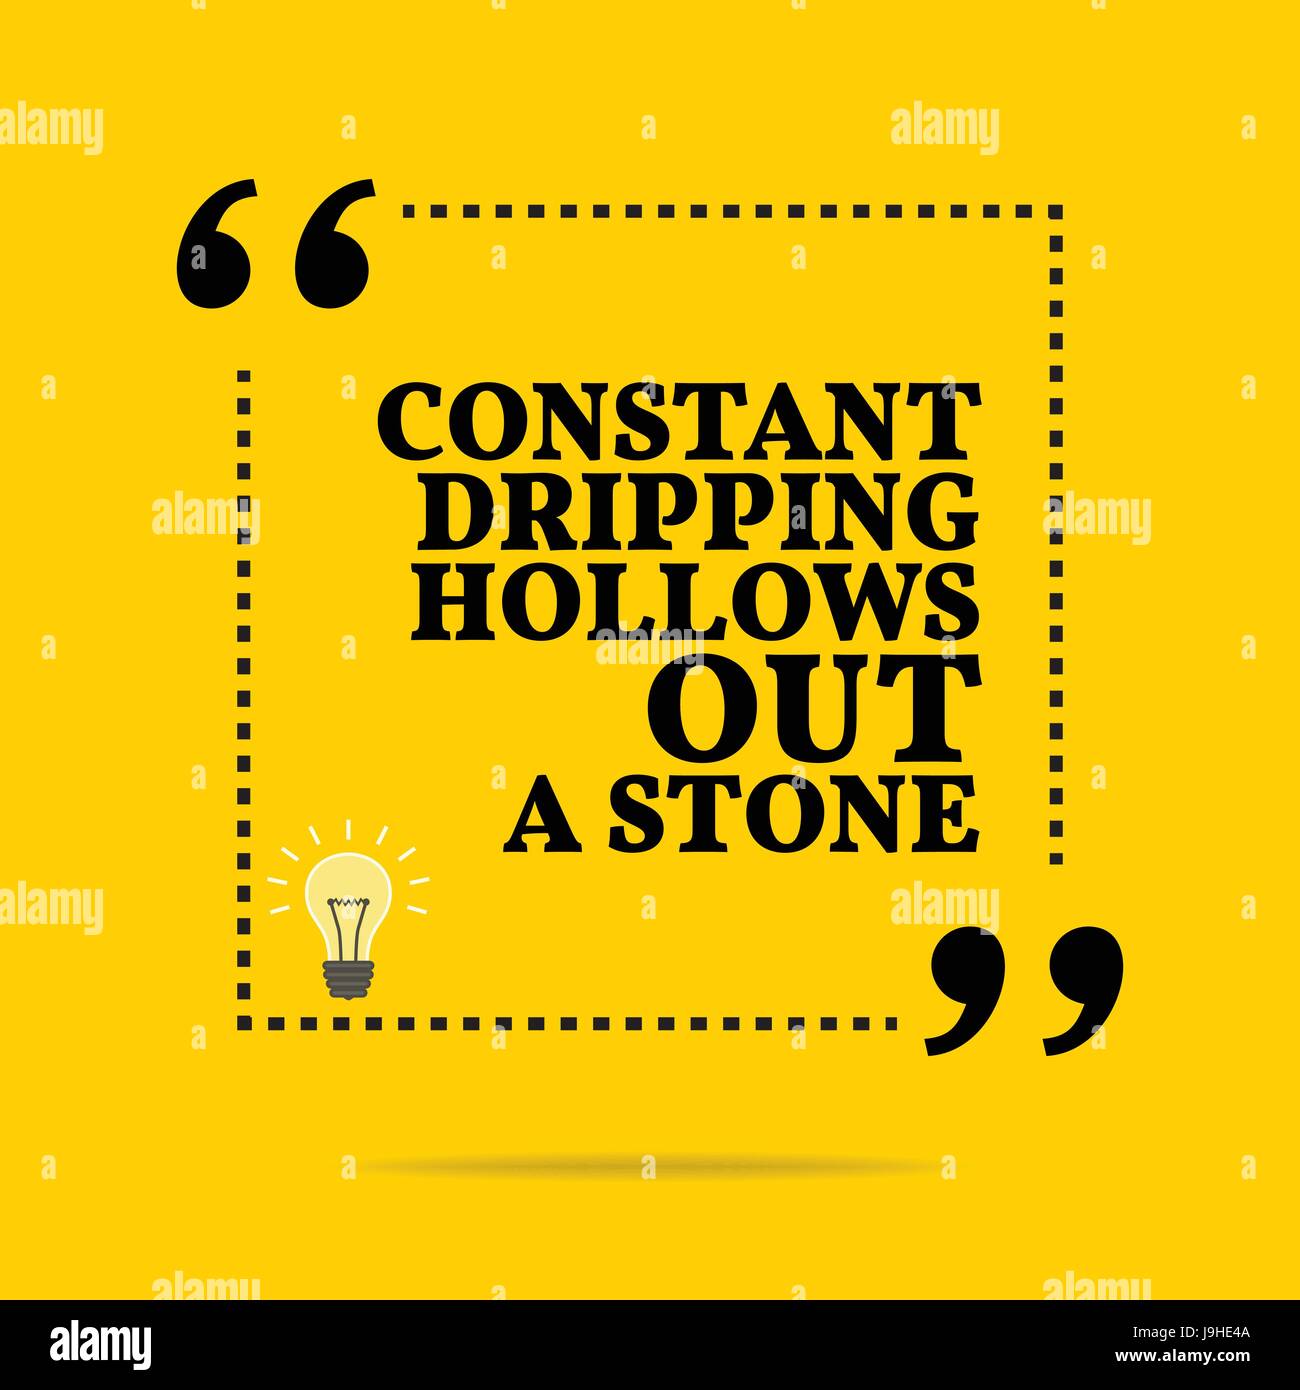 Inspirational motivational quote. Constant dripping hollows out a stone. Simple trendy design. Stock Vector